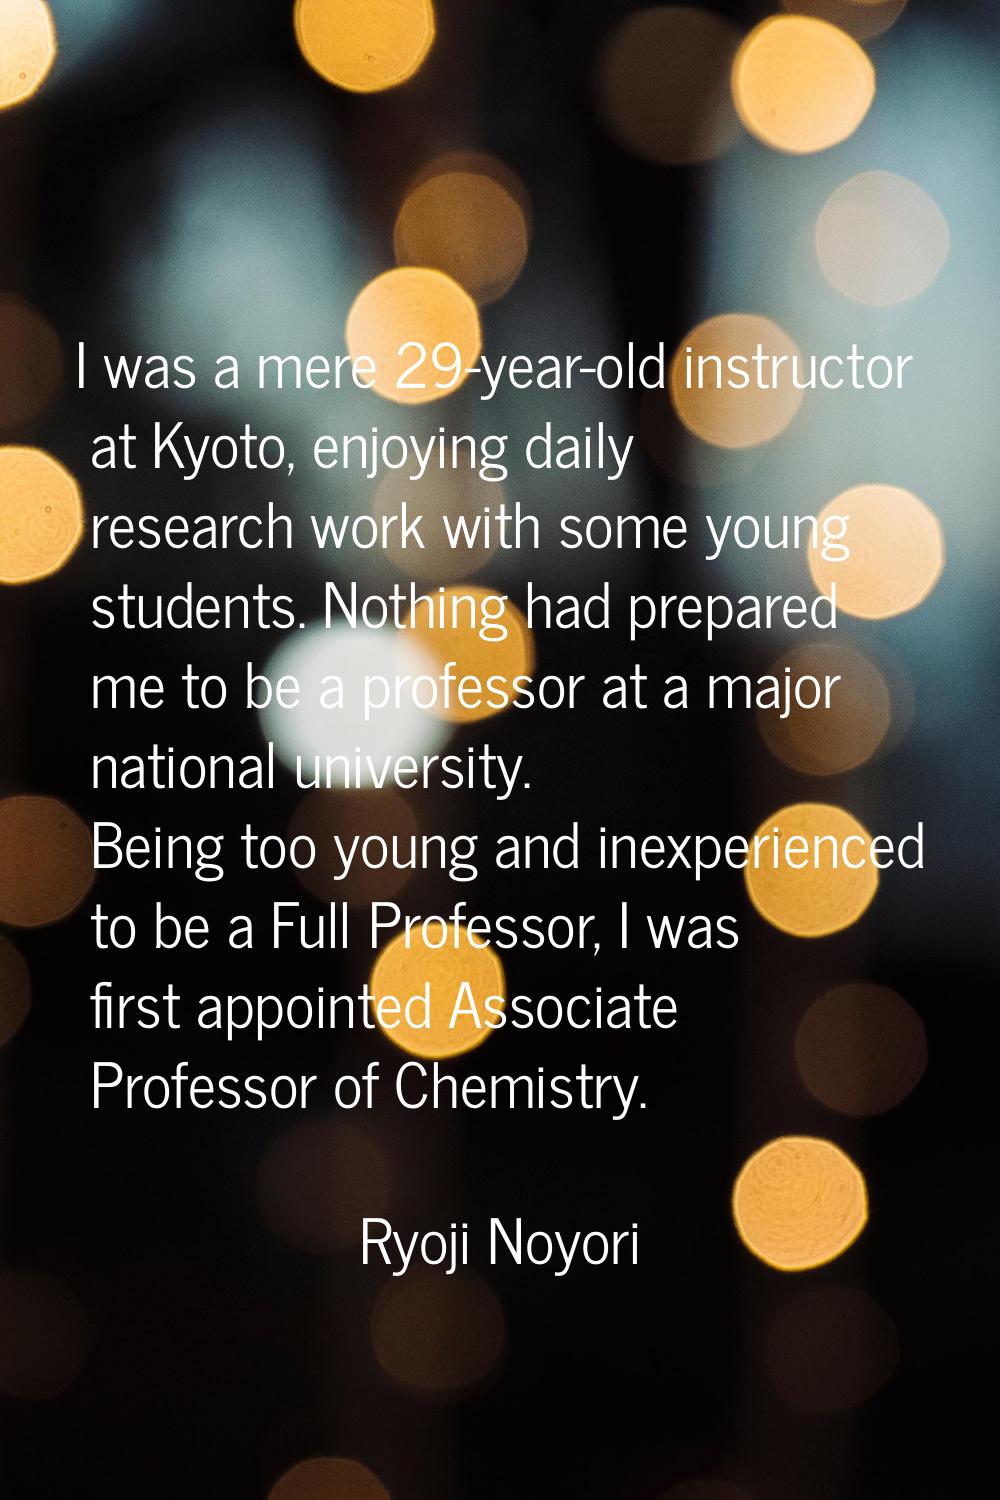 I was a mere 29-year-old instructor at Kyoto, enjoying daily research work with some young students